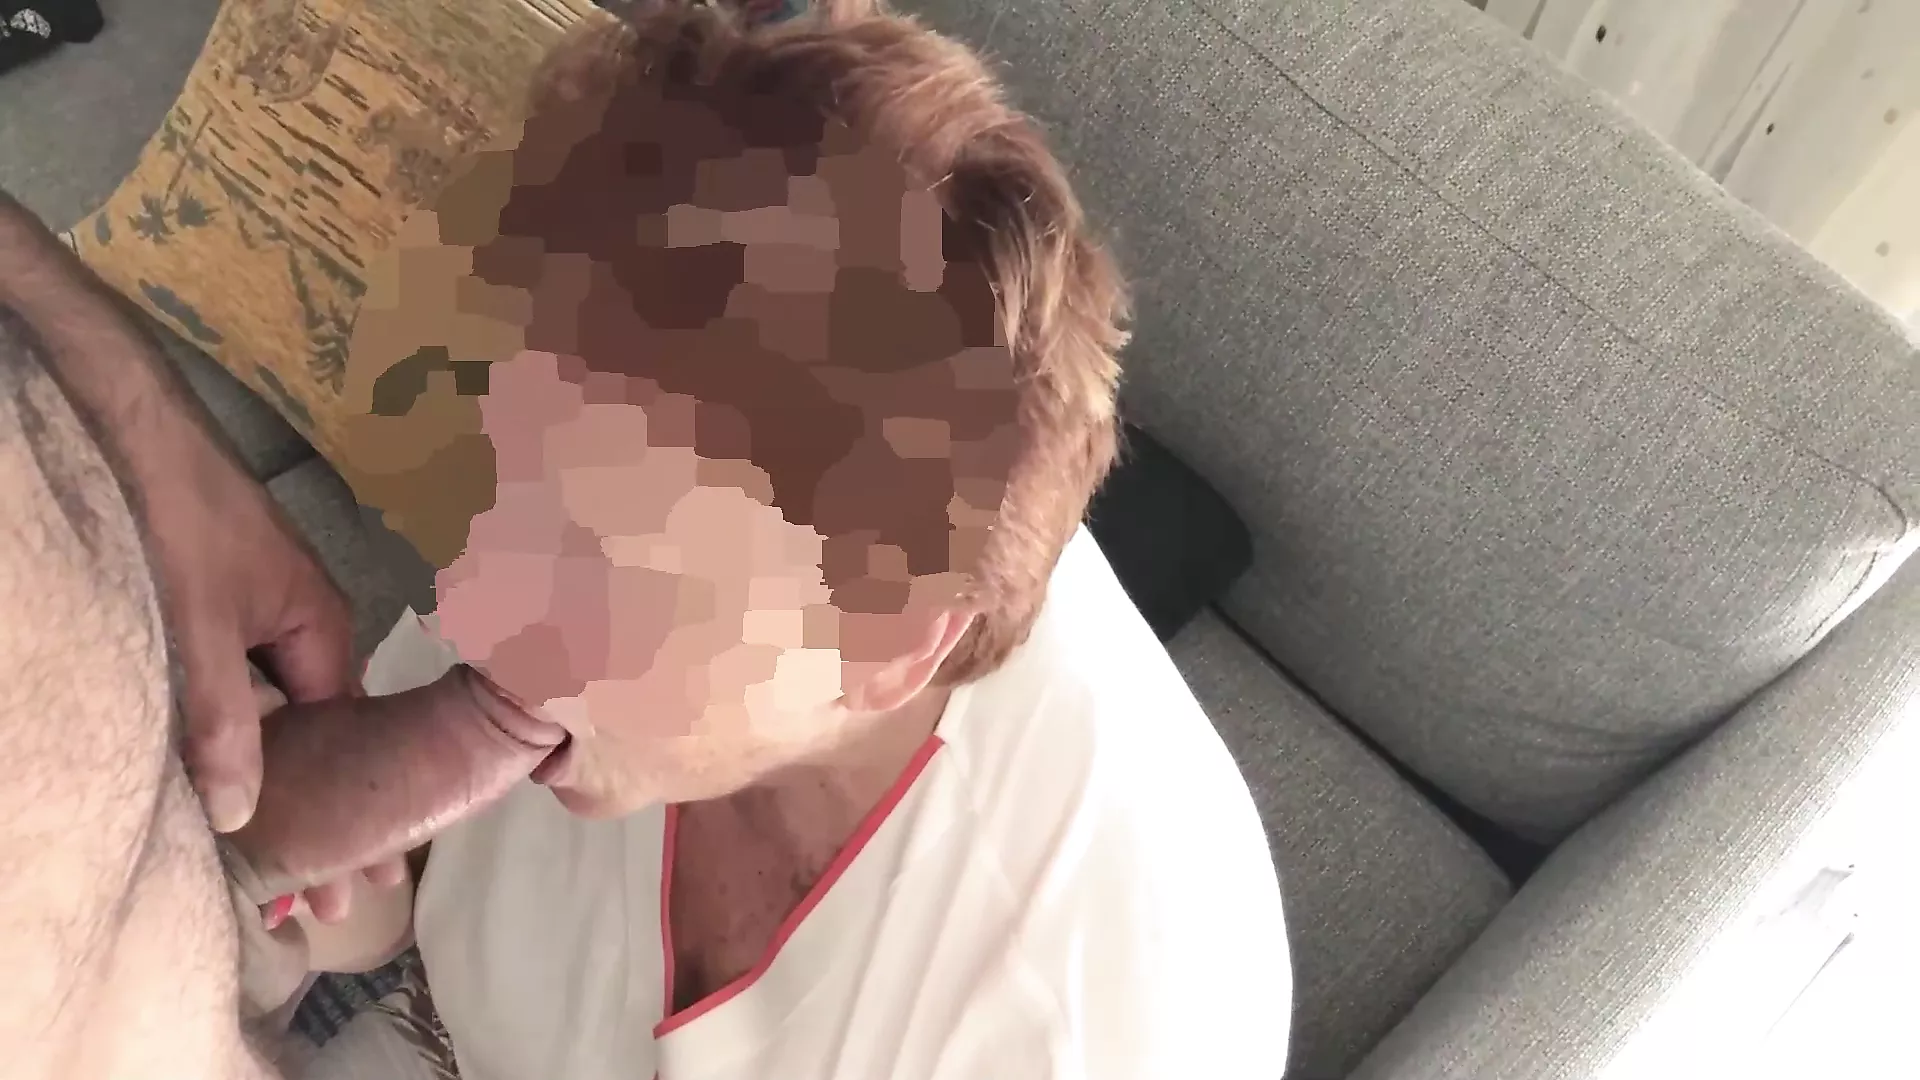 AMATEUR GRANNY PORN ANAL SEX AND CUM SWALLOWING WITH 80 YEARS OLD GRANDMA  photo